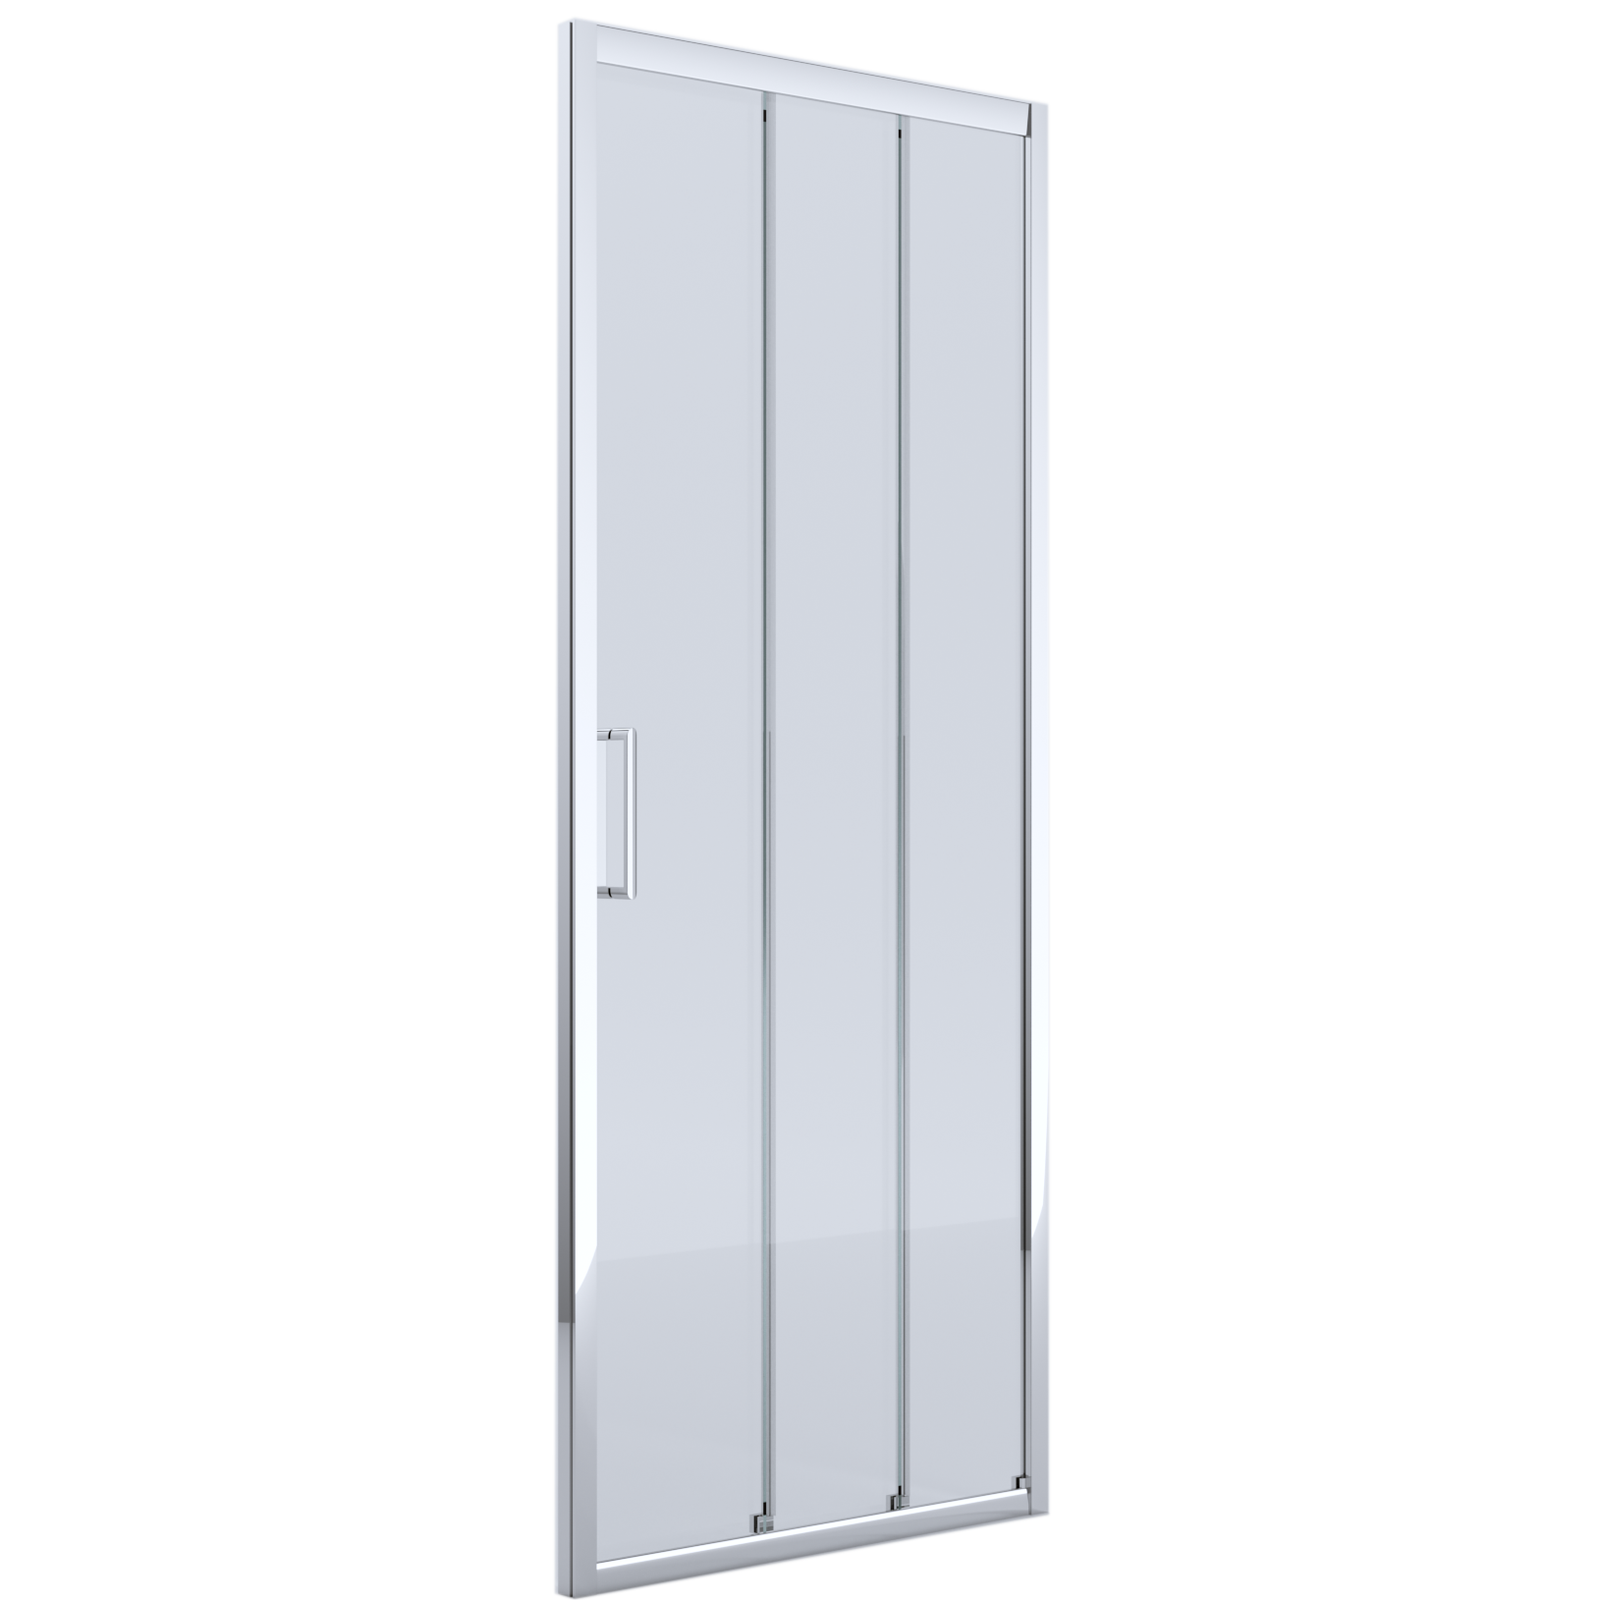 Layla Triple Panel Front Only Shower Screen with 2 Sliding & 1 Fixed